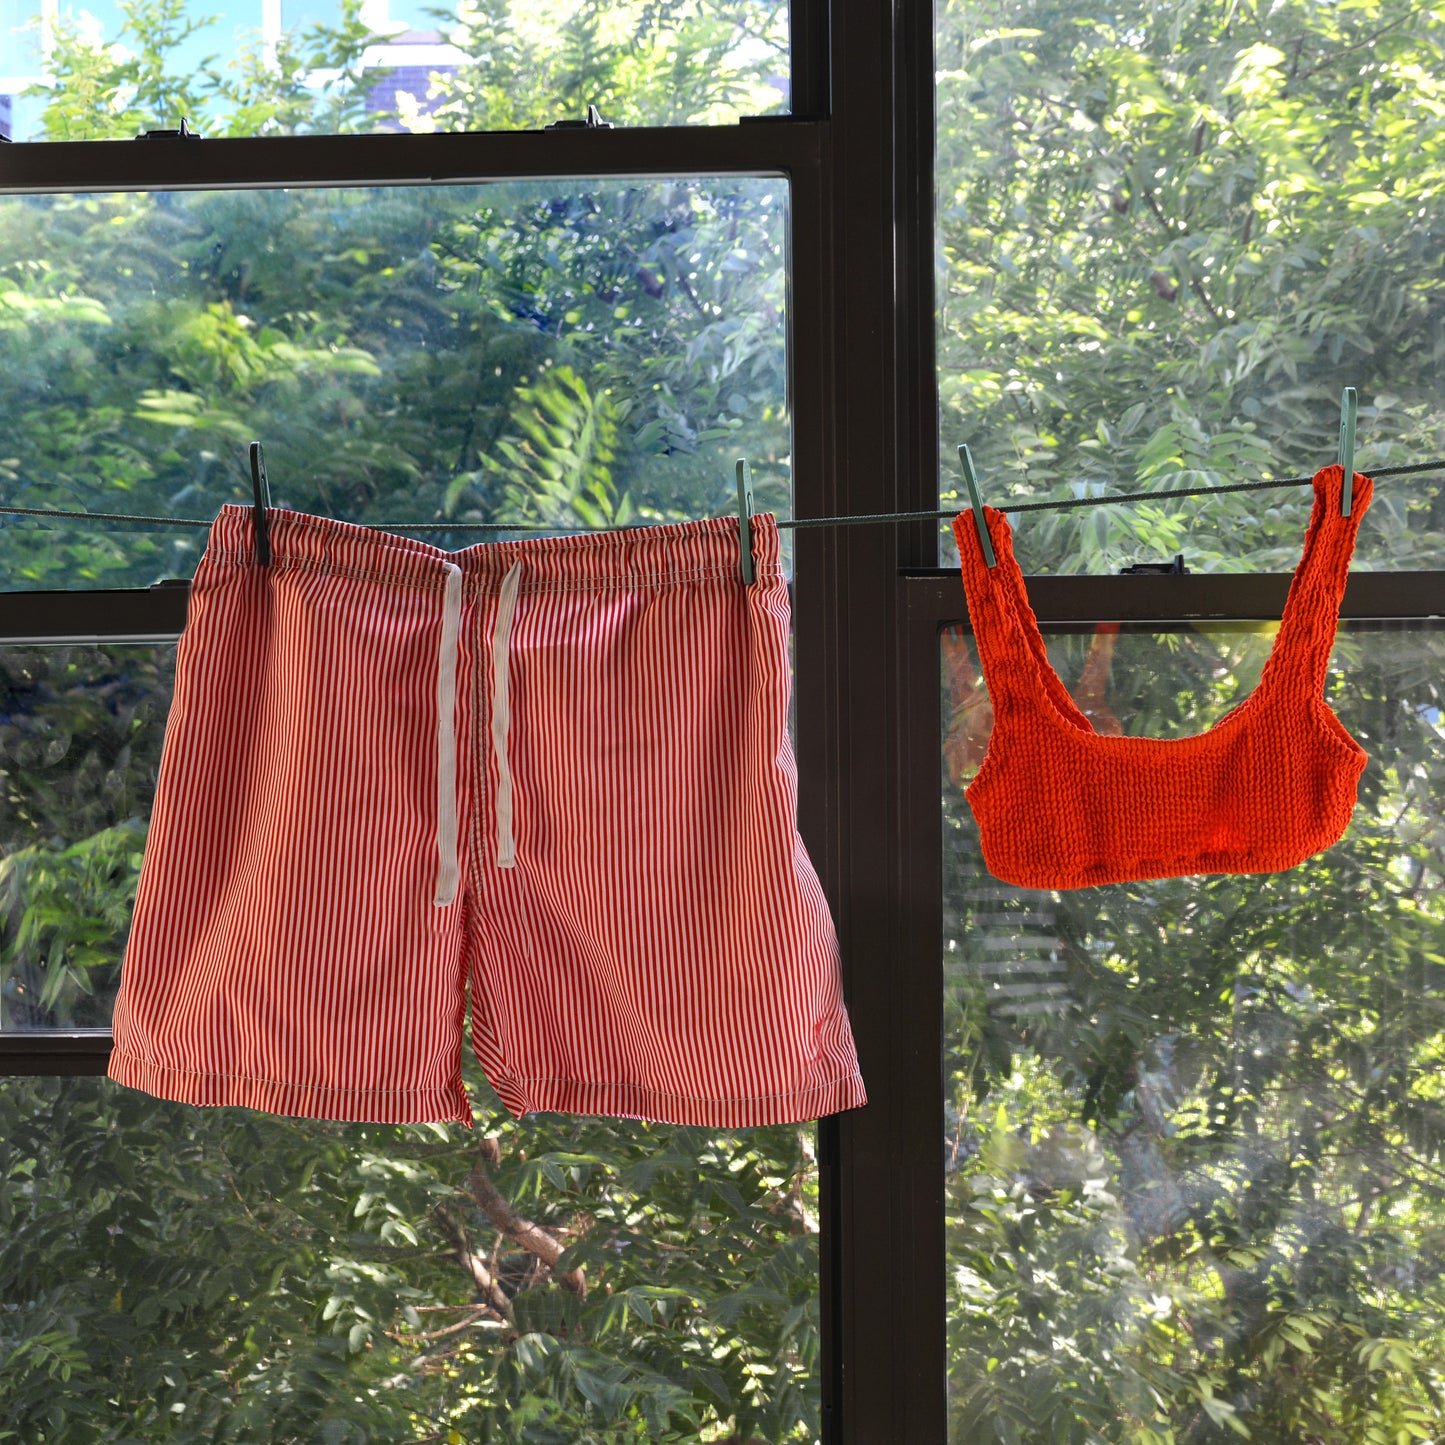 An orange swim top and striped swim trunks hang from the LOOP clothesline held up by green NONA clothespins in front of a leafy background